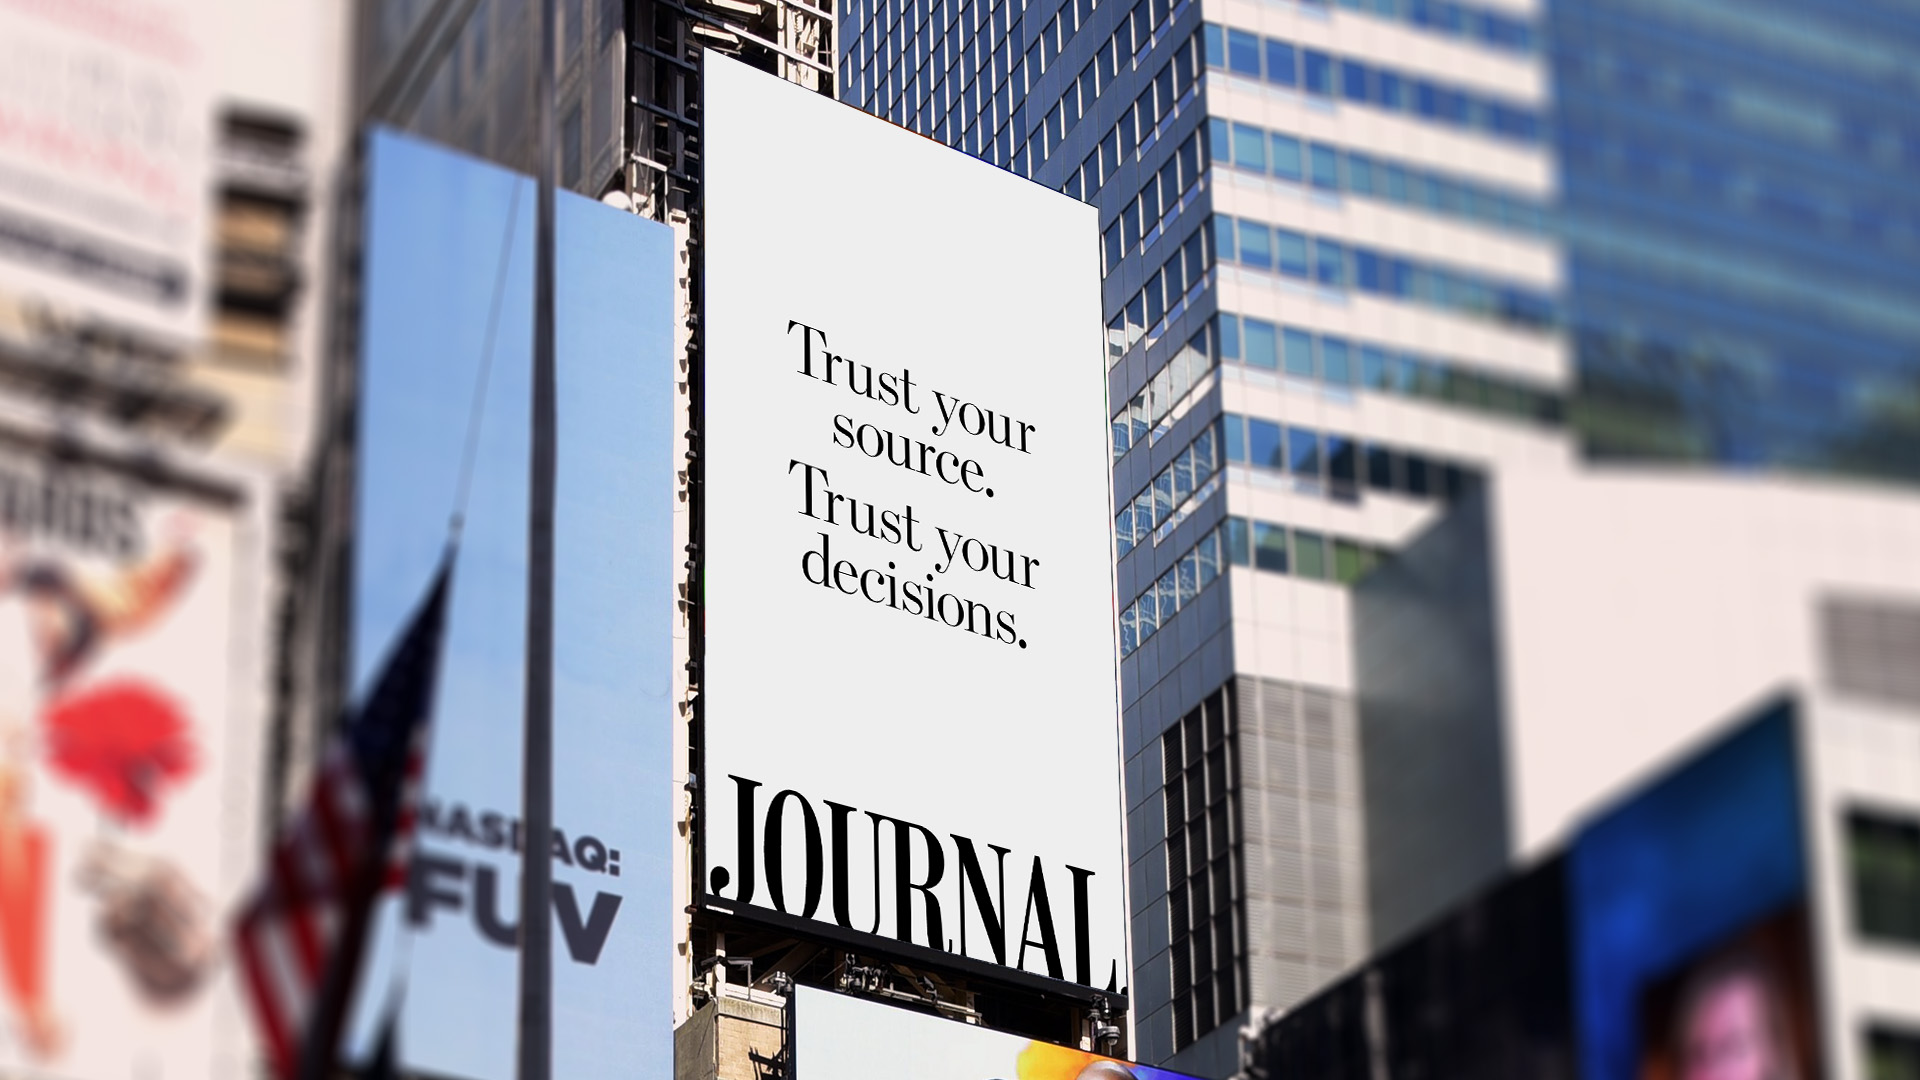 Inside The Wall Street Journal's latest push for new subscribers